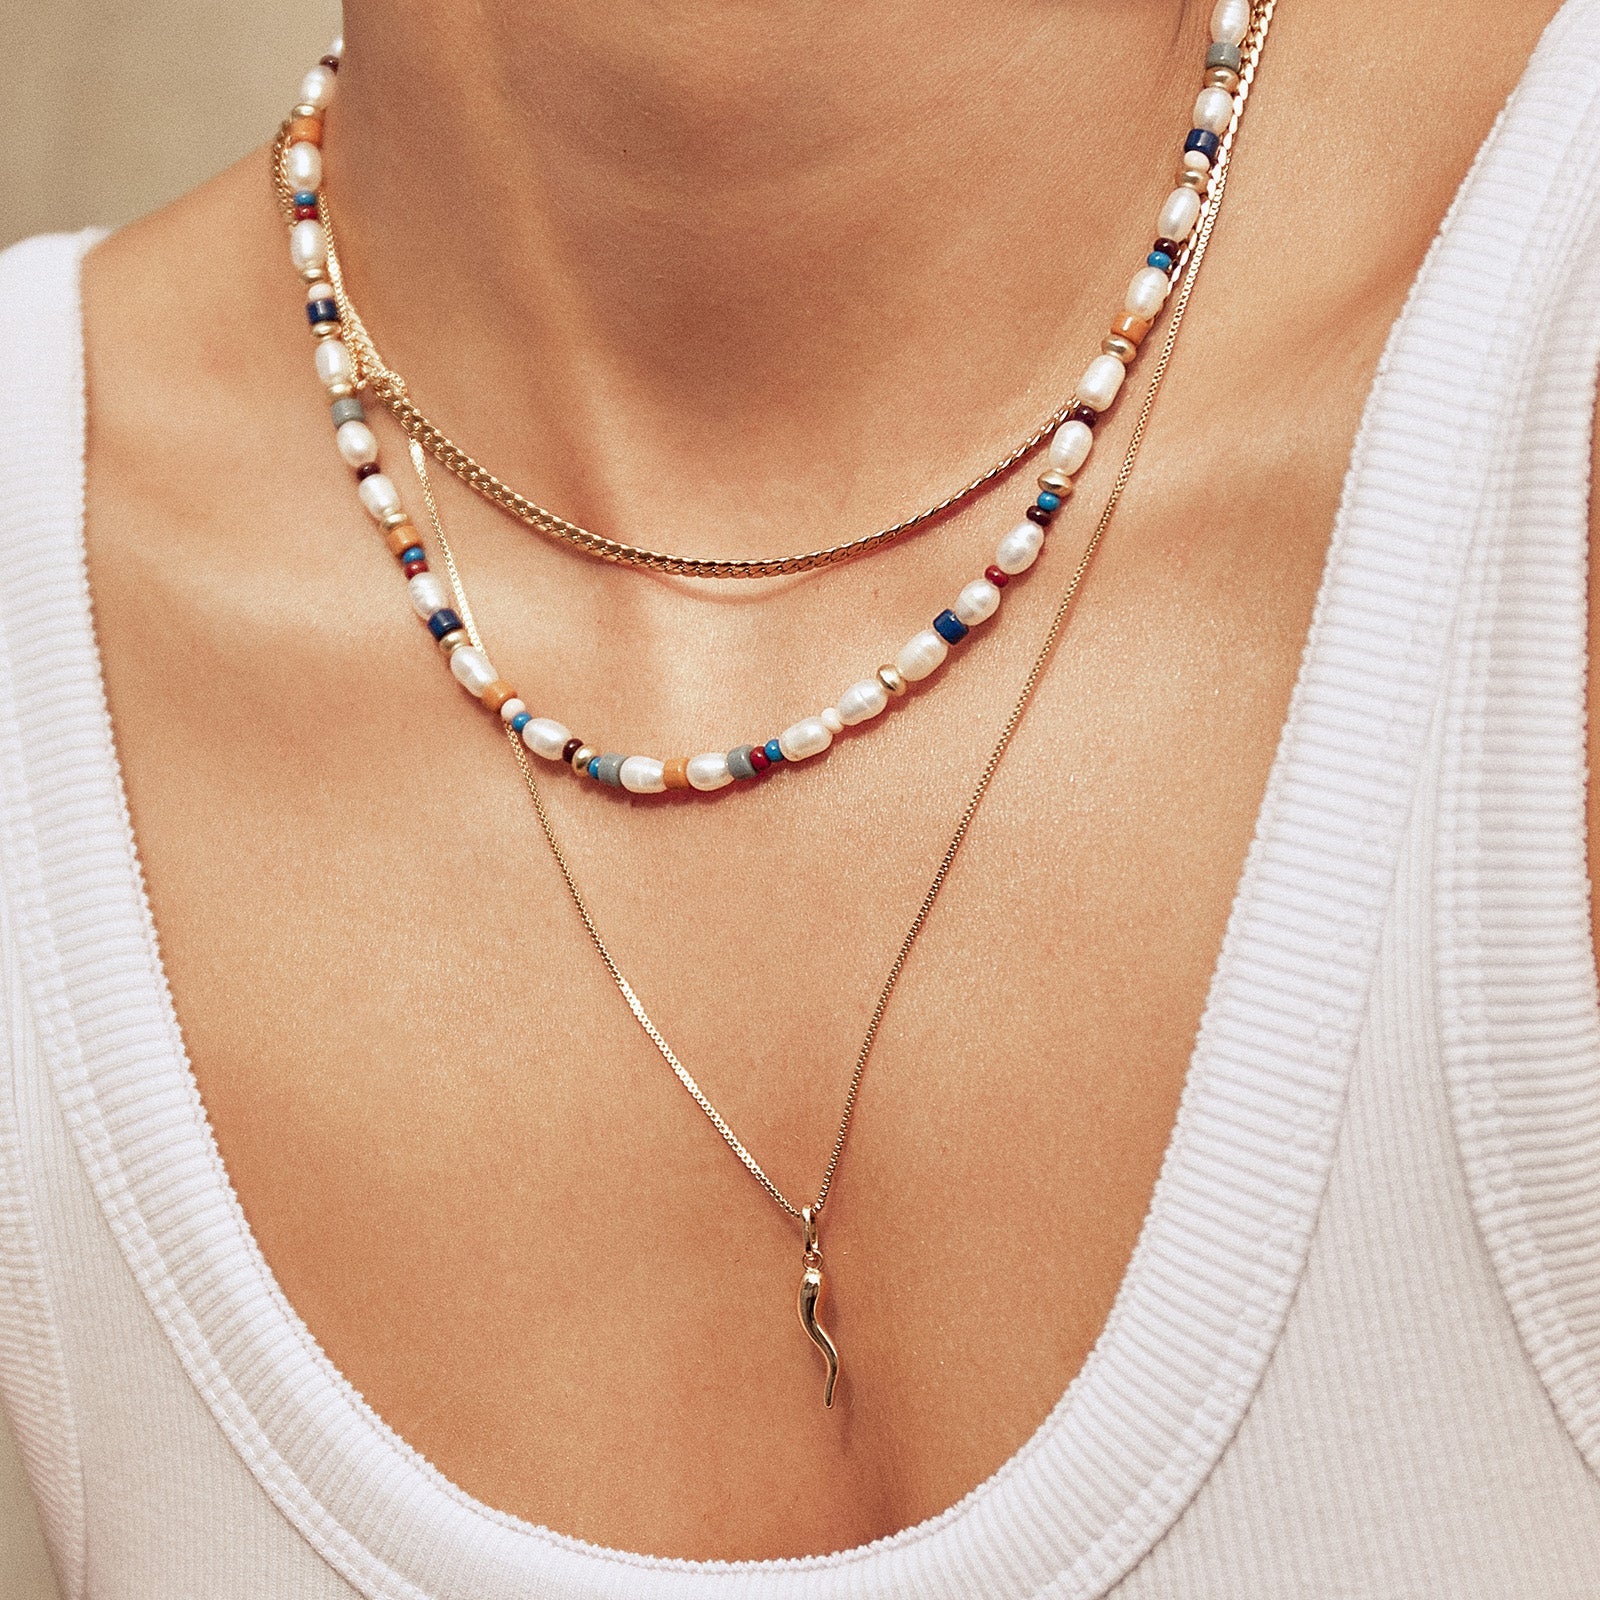 Arms Of Eve Chelsea pearl necklace, delicately handcrafted with beads of color